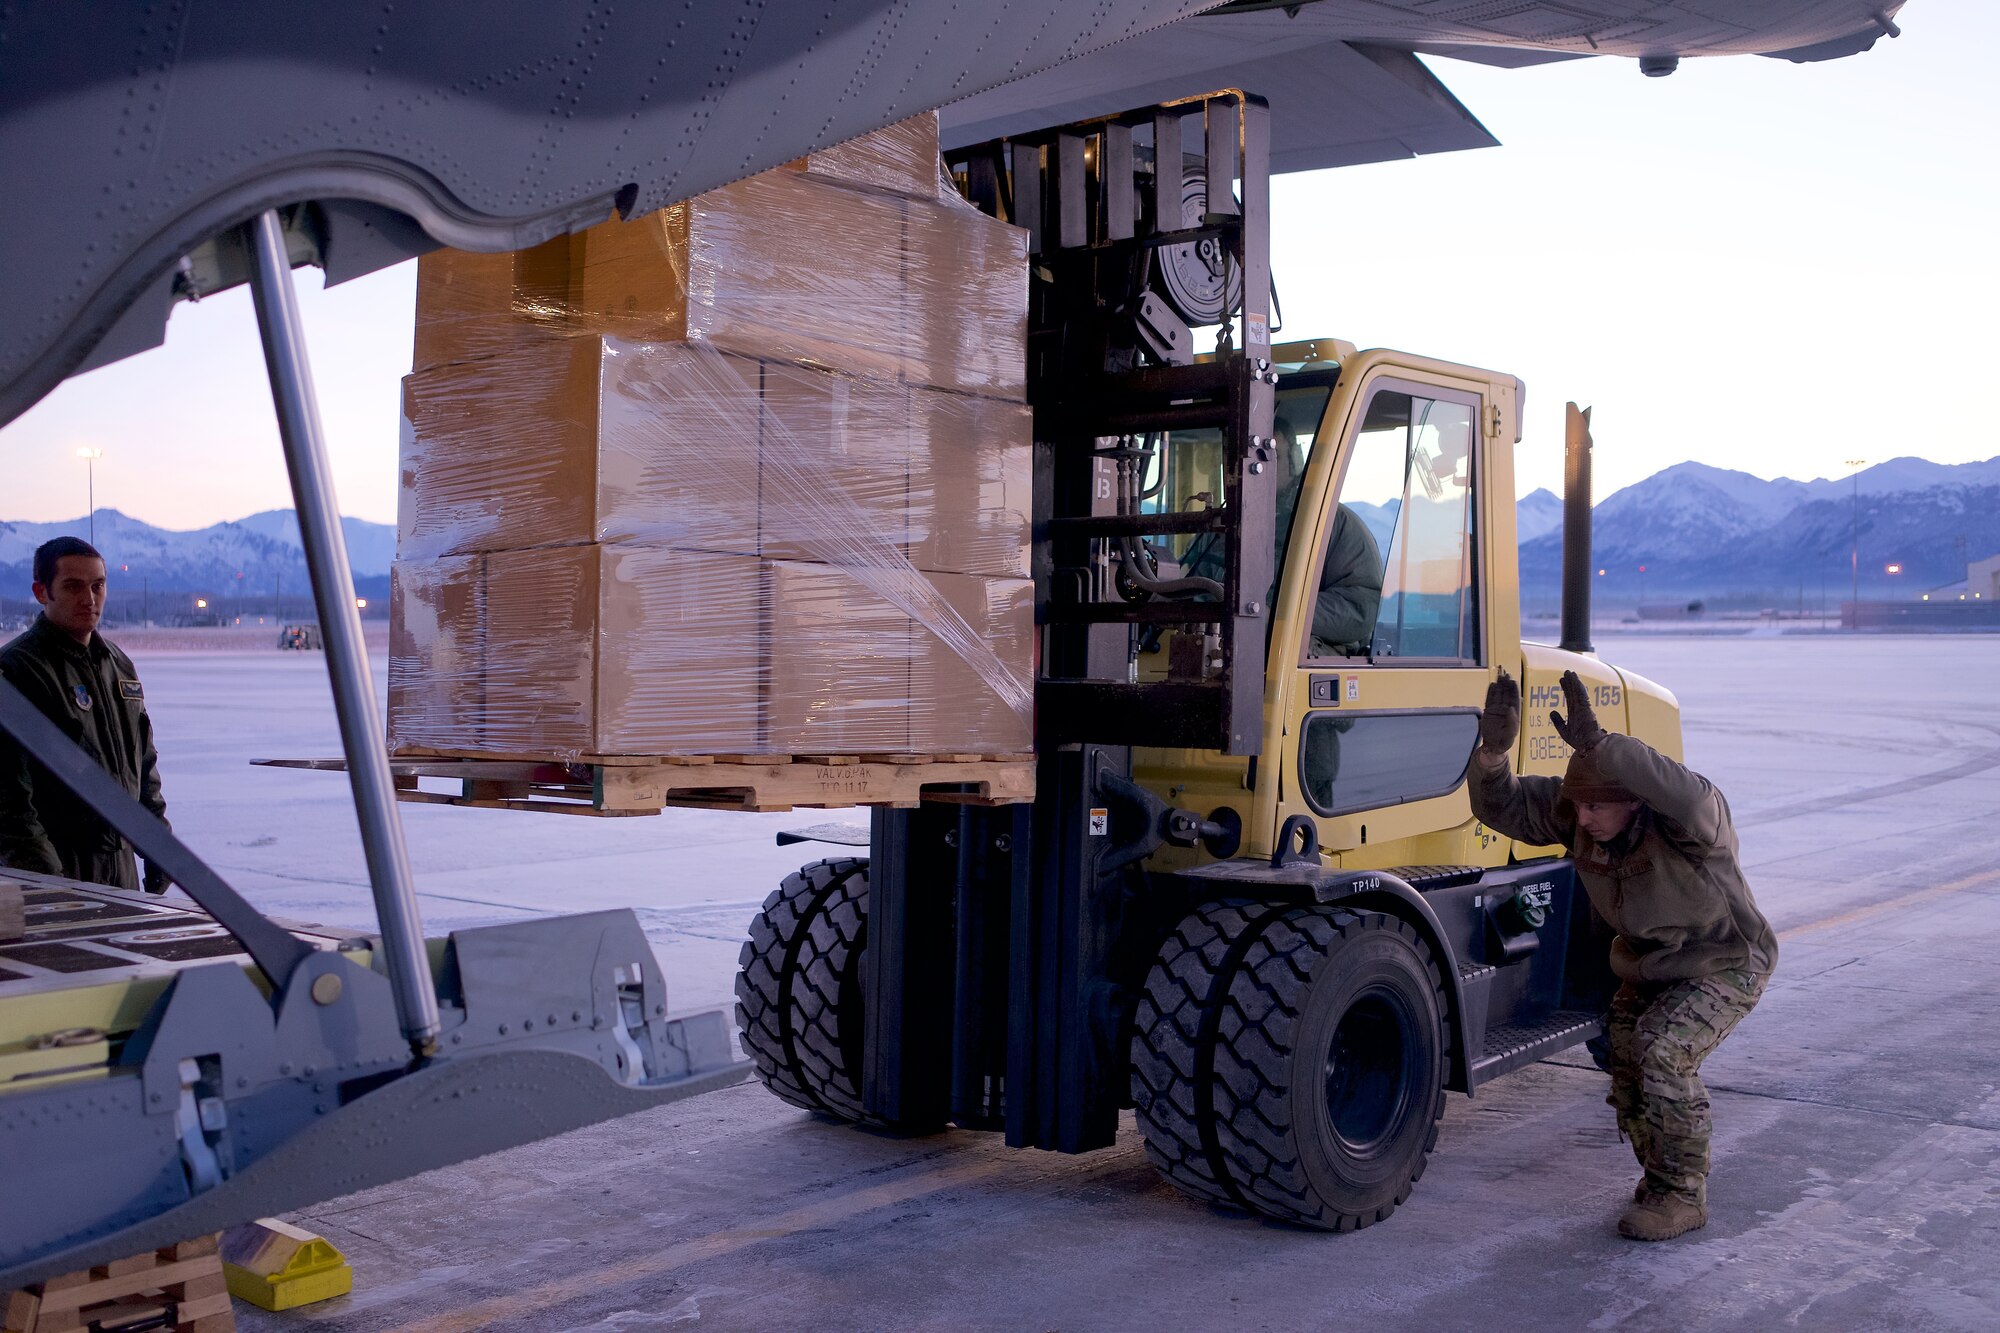 Airmen of 176th Wing load boxes containing prescription drugs onto a 211th Rescue Squadron HC-130J Combat King II Nov. 6, 2018, at Joint Base Elmendorf-Richardson, Alaska, for transport to Spokane, Washington, for incineration. Airmen of 176th Wing, members of the Alaska National Guard Counterdrug Support Program, and special agents of the Drug Enforcement Administration joined forces in the effort of transporting more than 4,000 pounds of prescription drugs turned in during Alaska’s biannual prescription drug take back. (U.S. Air National Guard photo by David Bedard/Released)